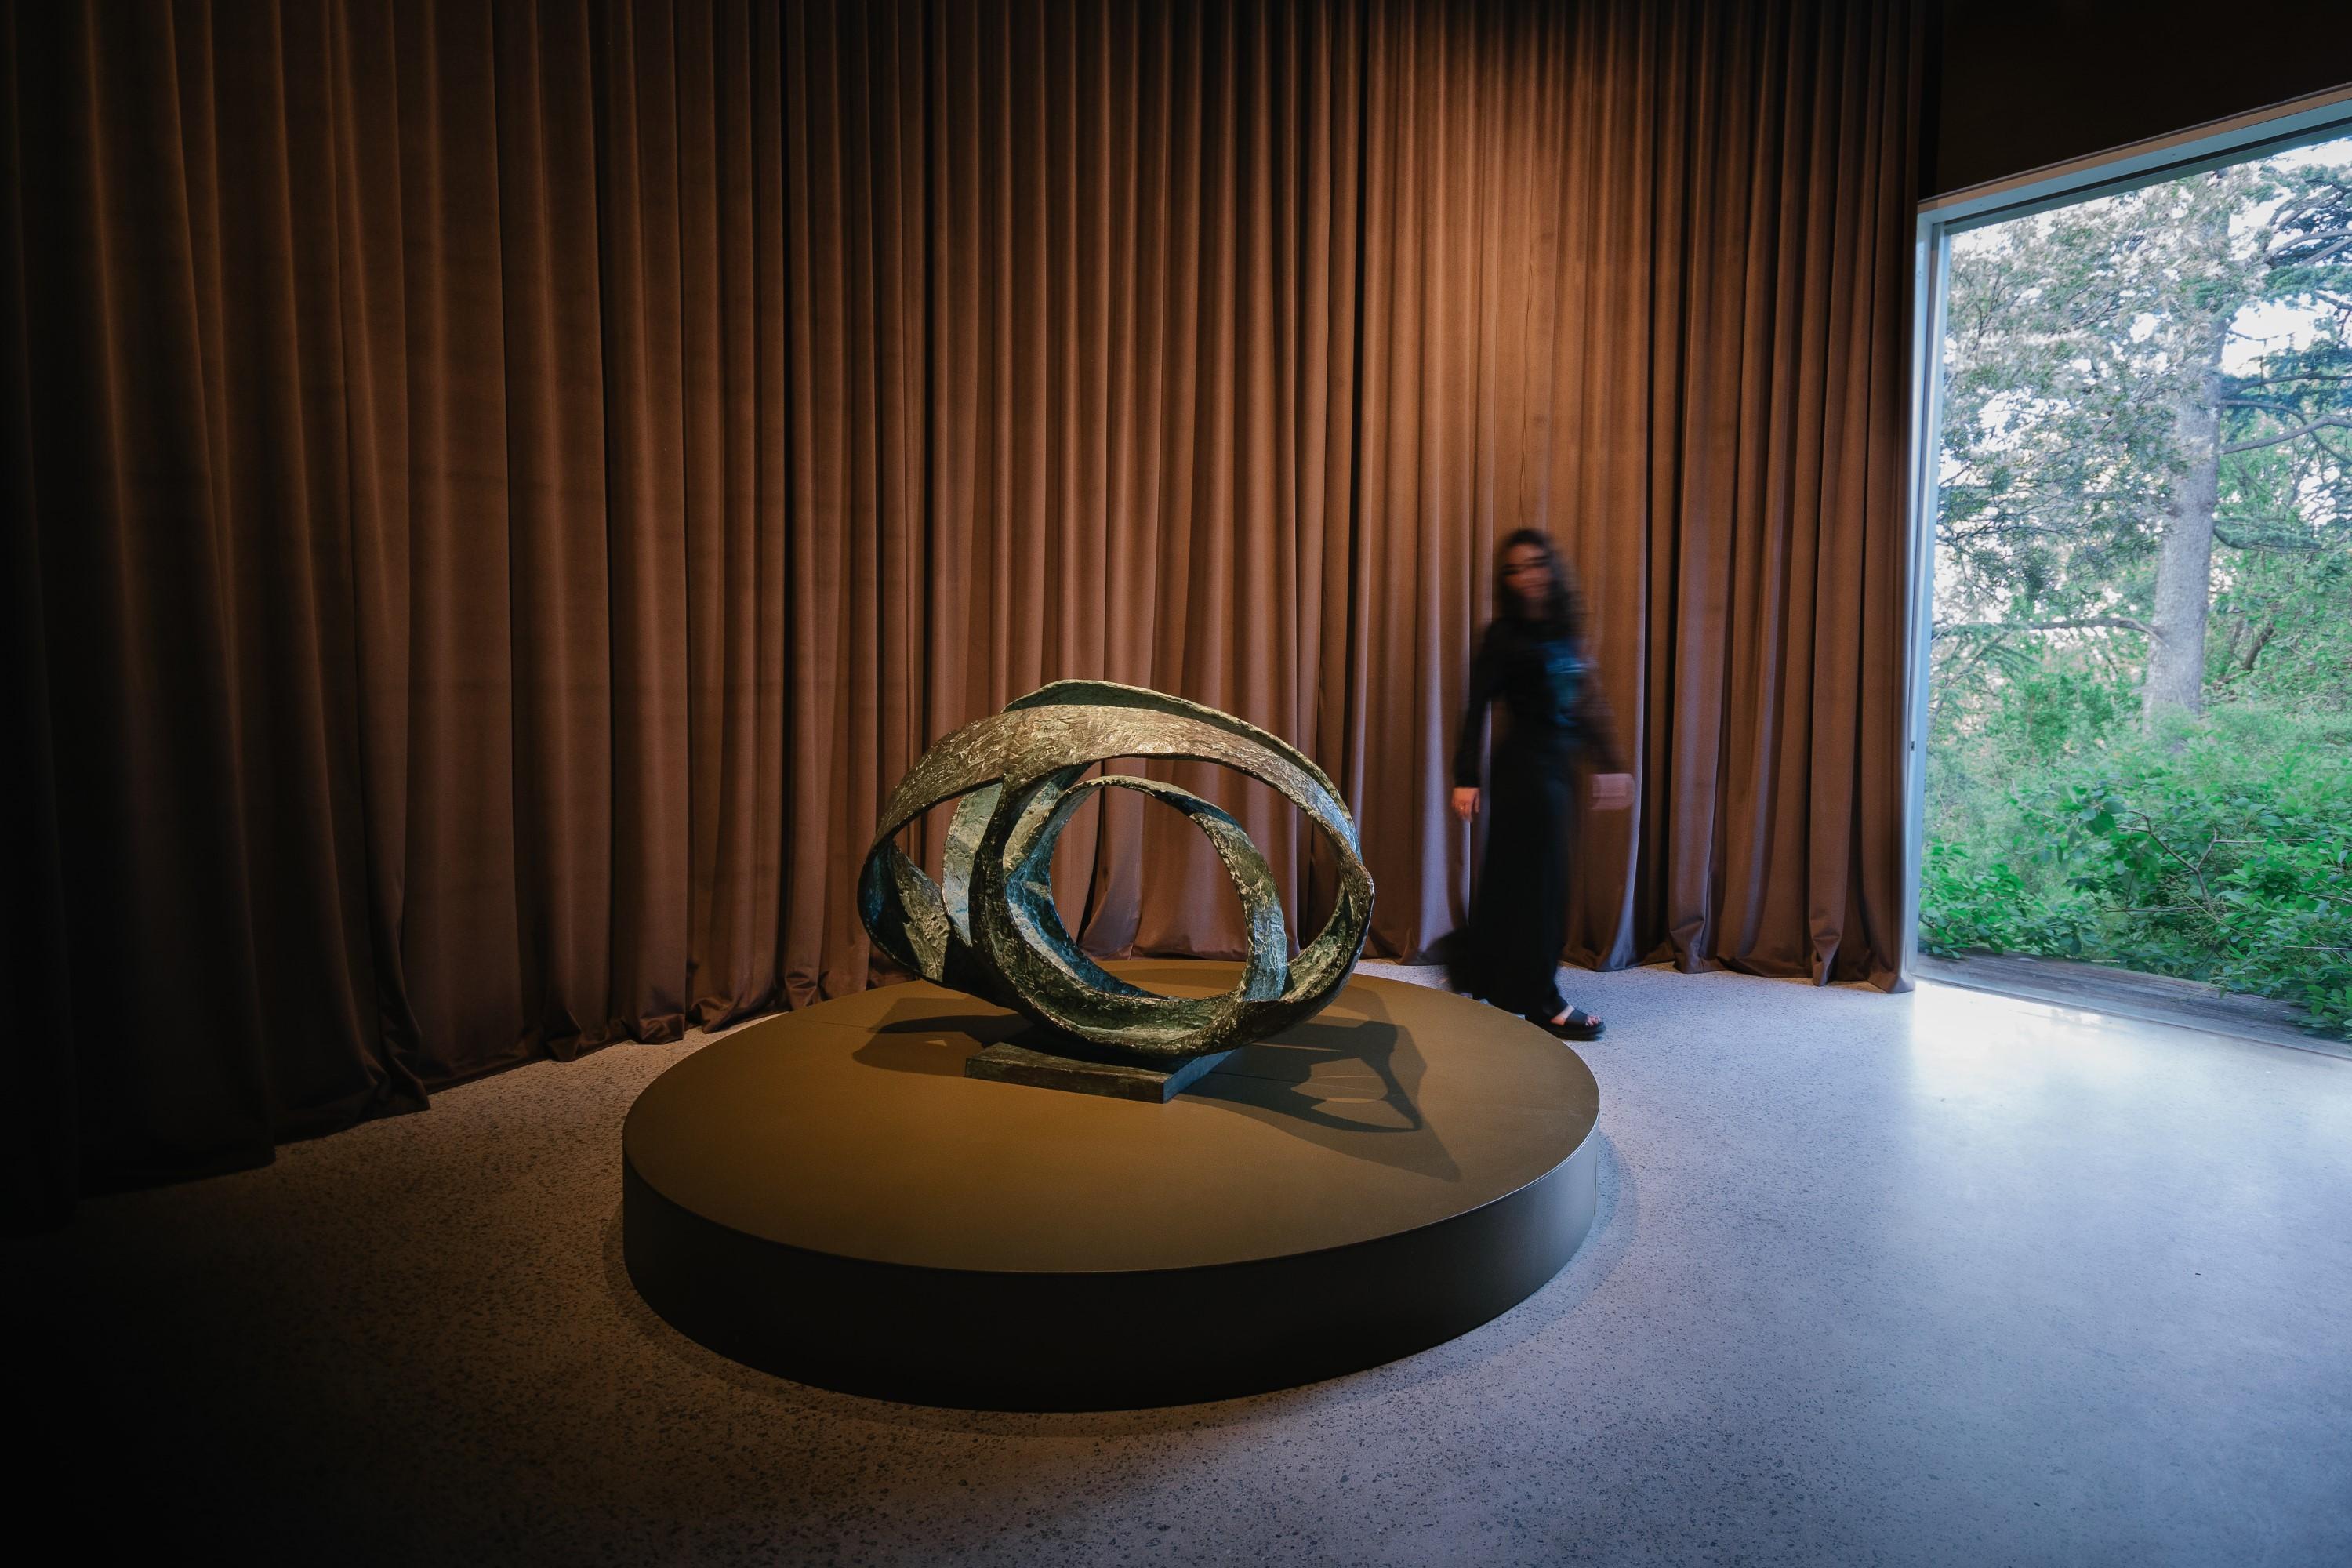 Gallery interior with large window to the right and a dark brown curtain covering the rear wall. A woman dressed in black walks around a a twisted metal sculpture that sits on top of a short circular stand.